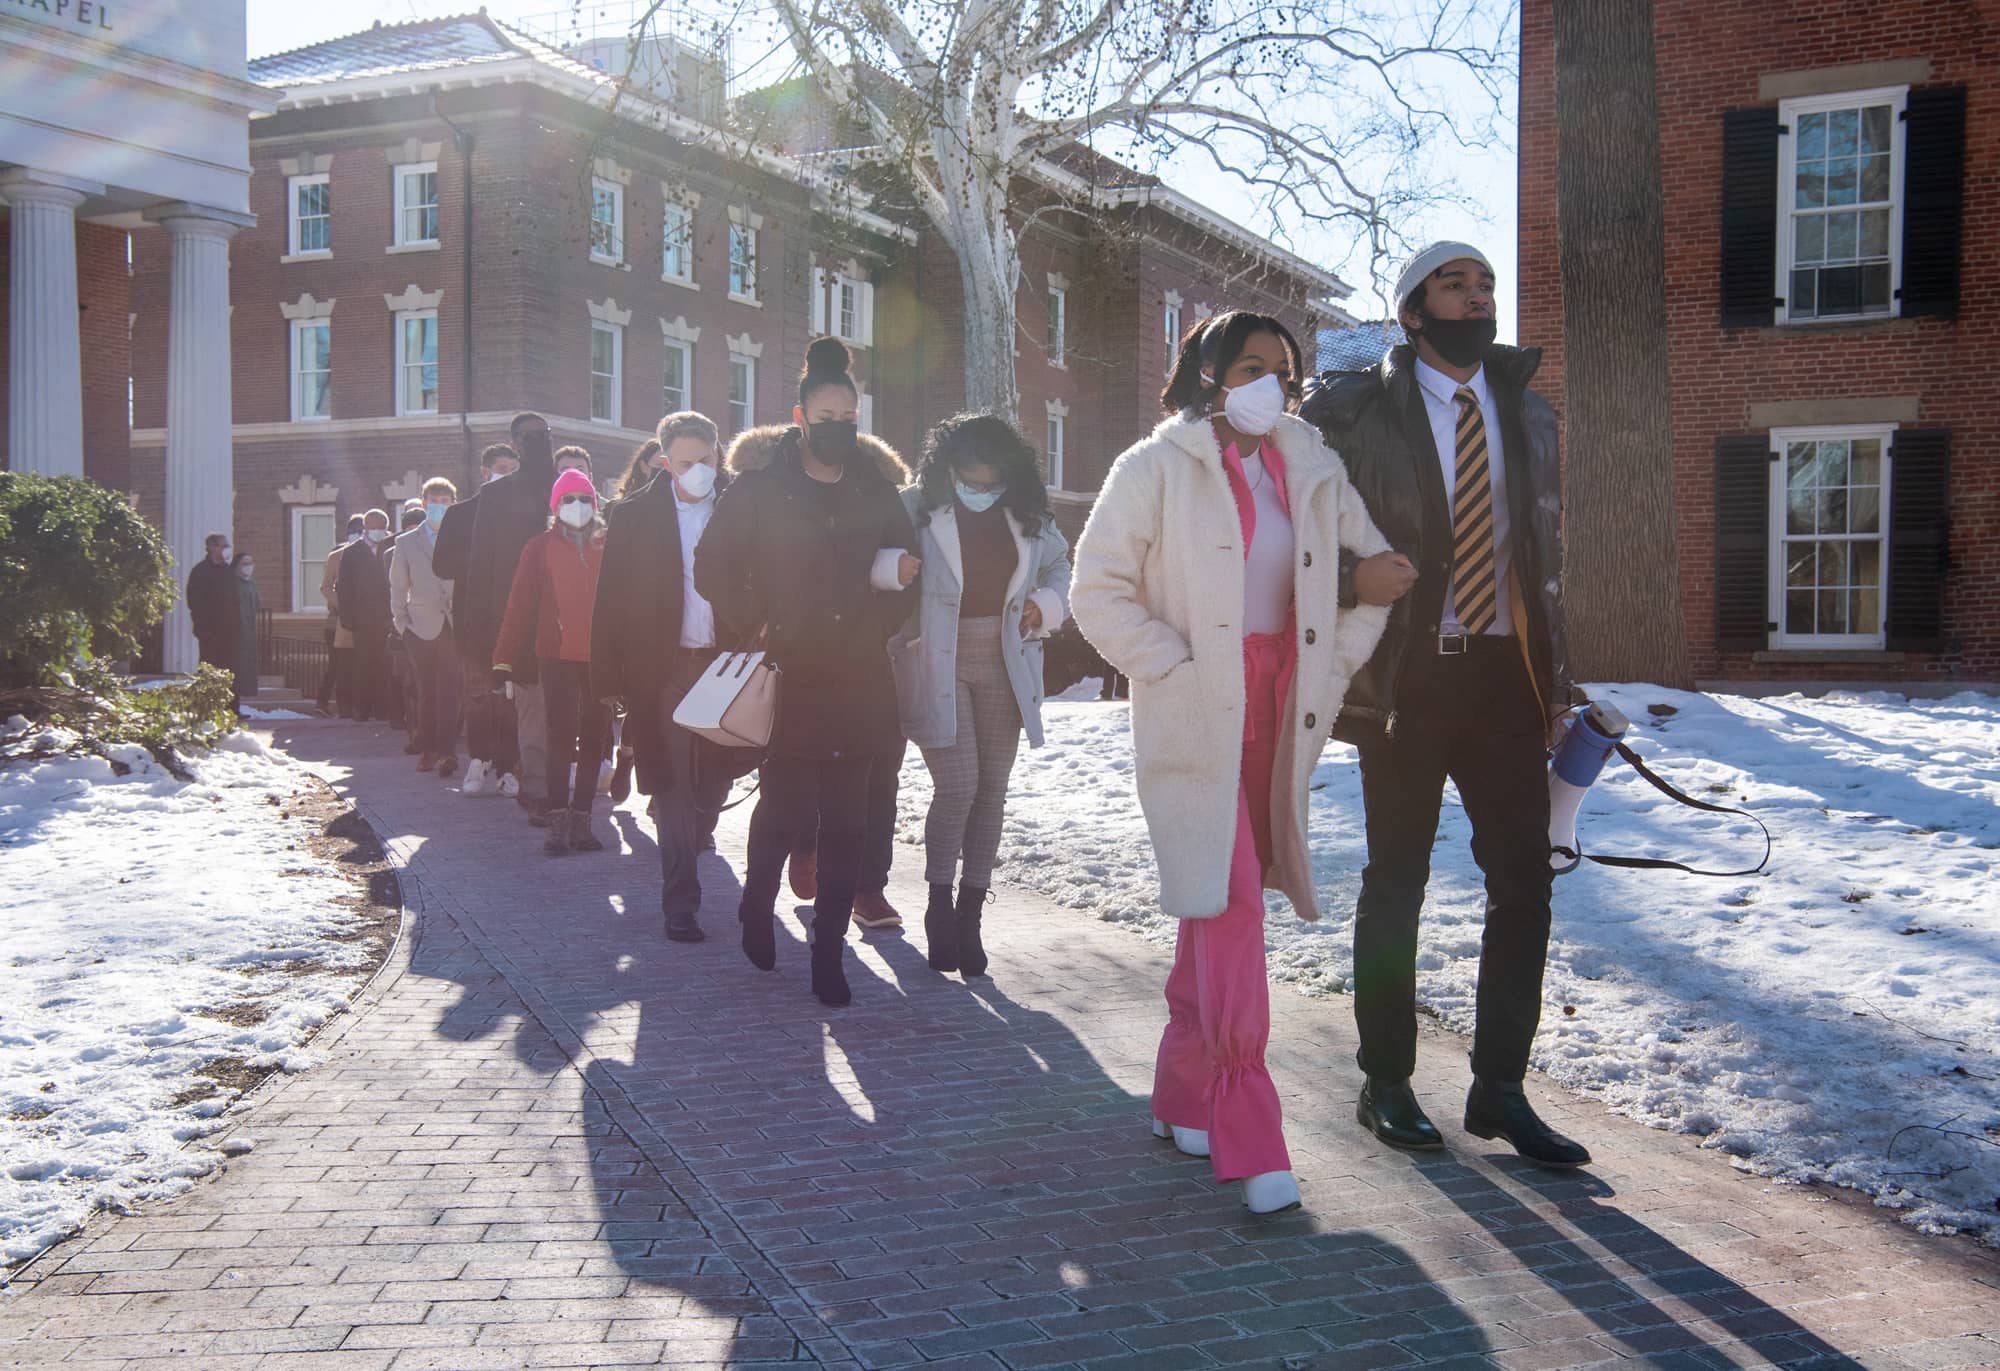 Members of the Alpha Phi Alpha Fraternity, Athens community members, OHIO students, faculty and staff participate in the Dr. Martin Luther King Jr. Silent March.